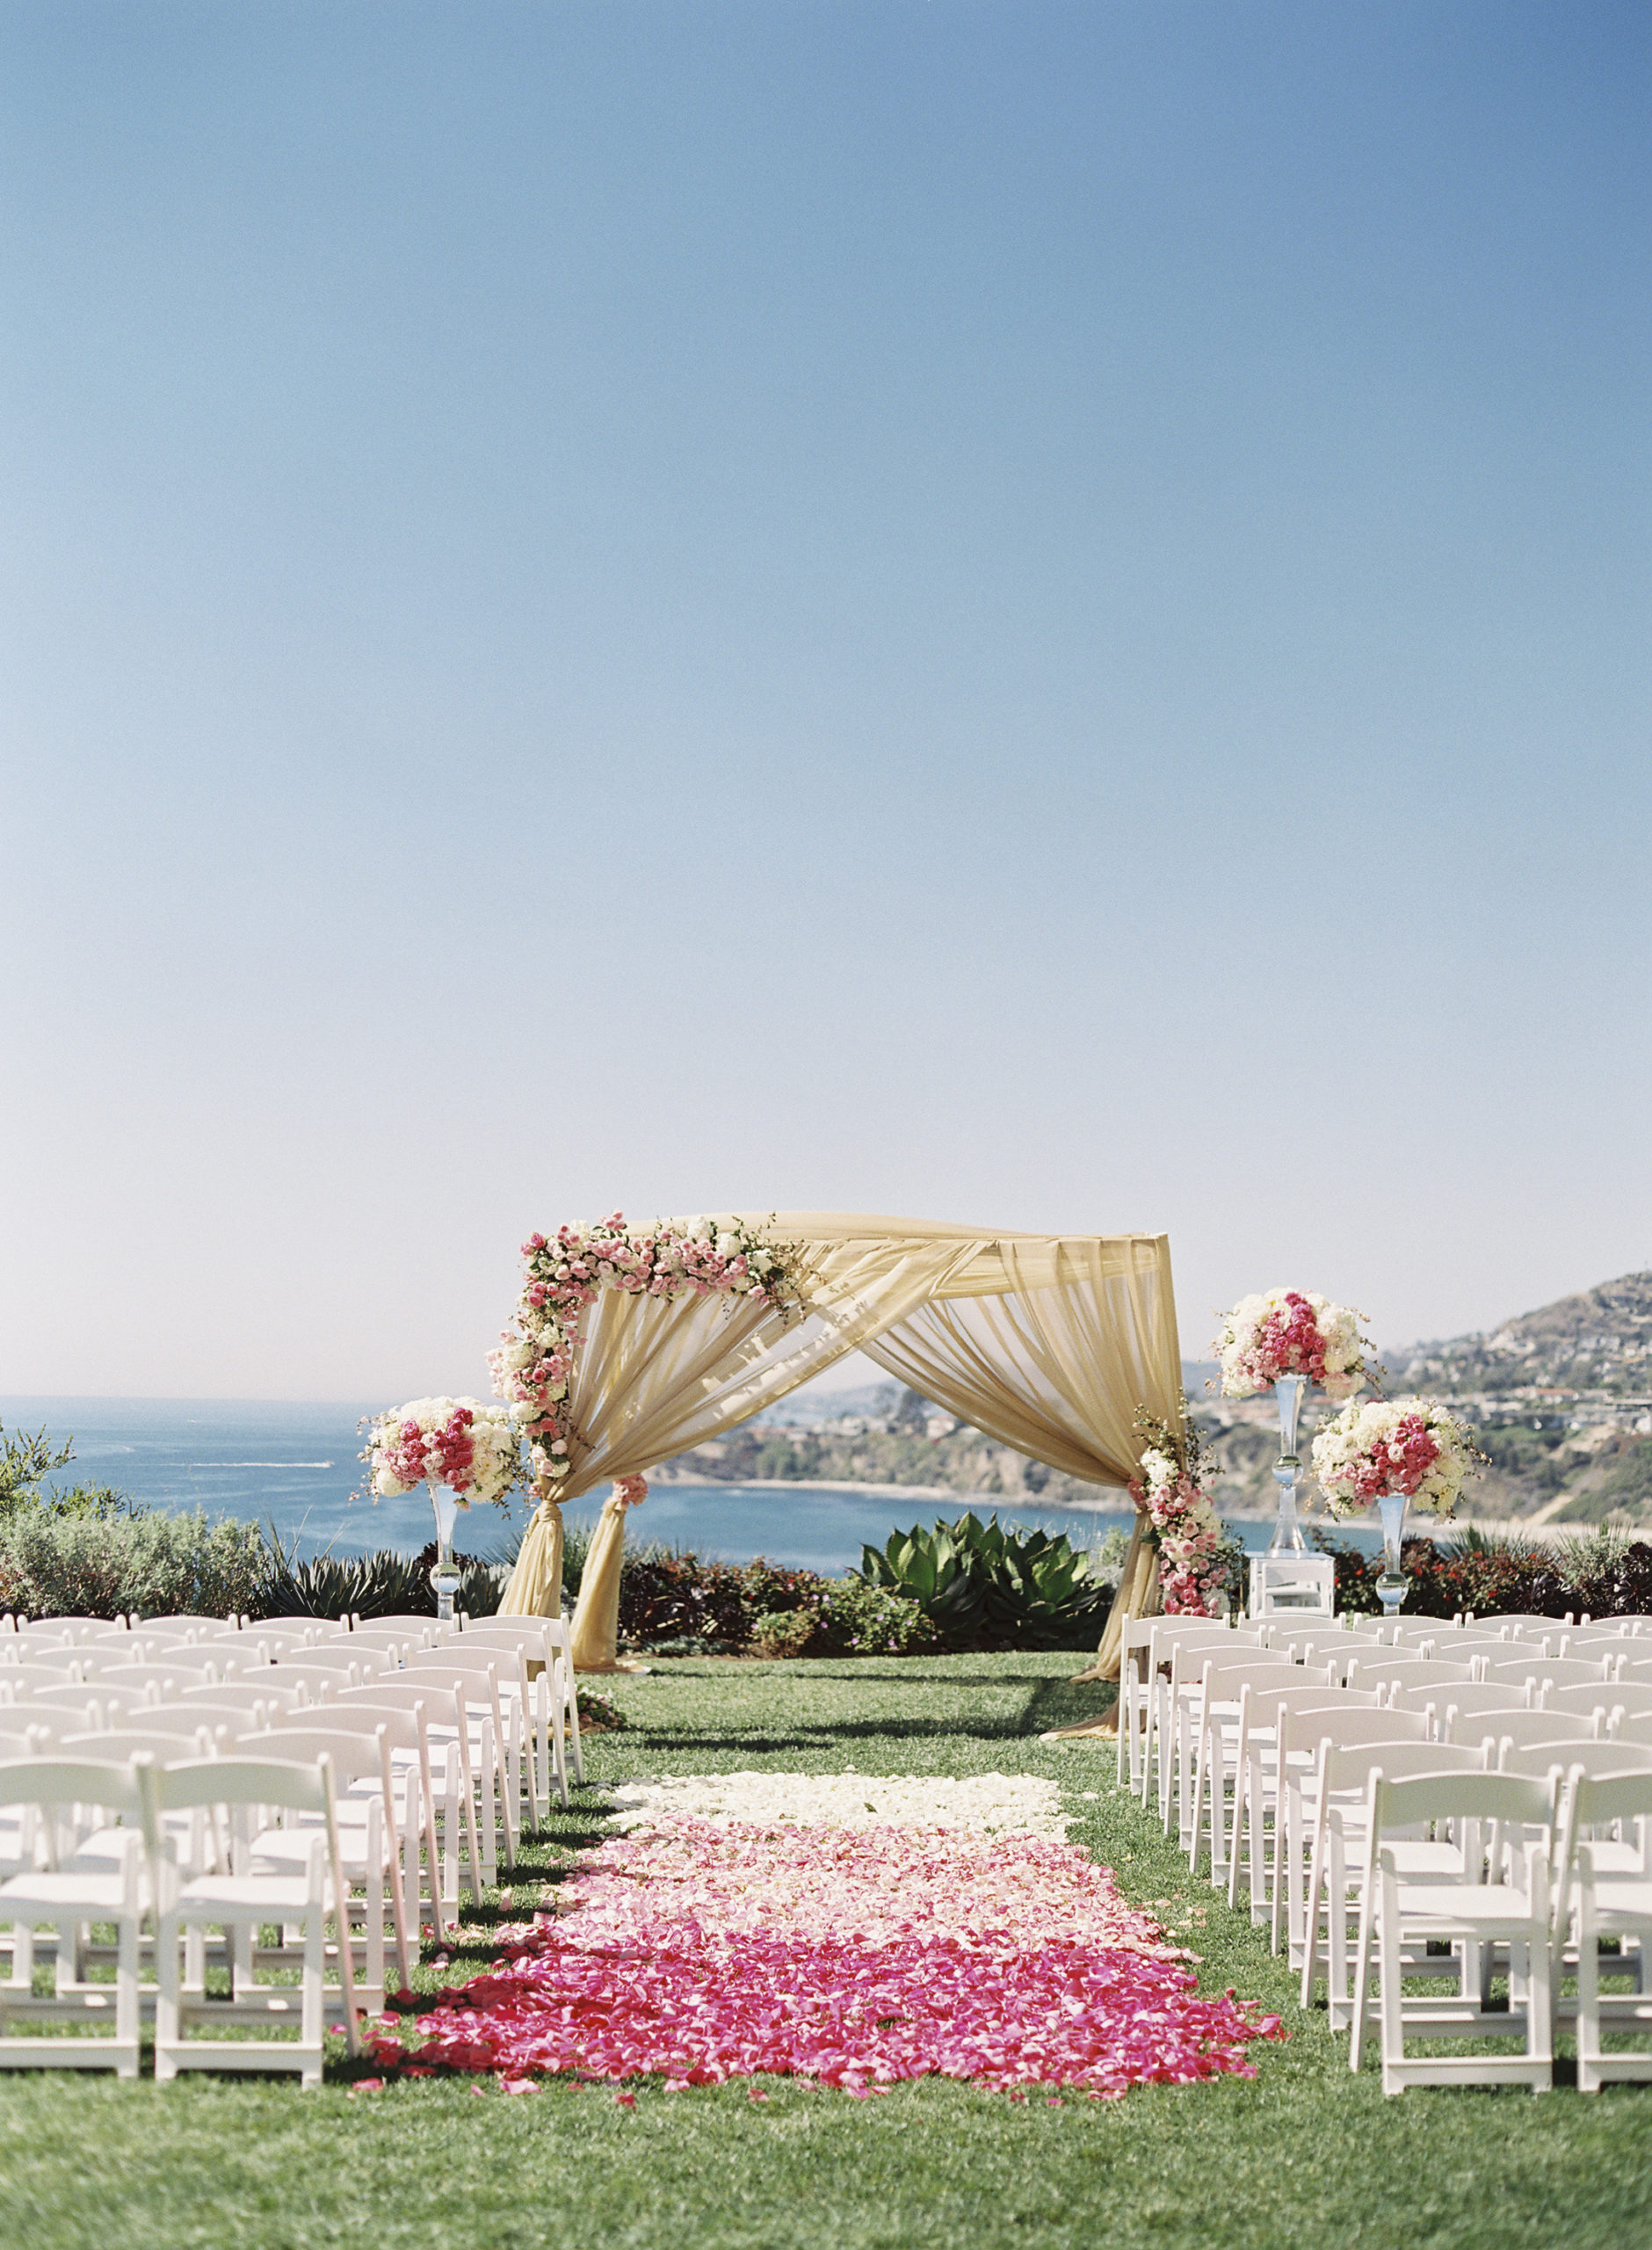 Wedding alter overlooking the ocean with white and pink flower pedals down the aisle